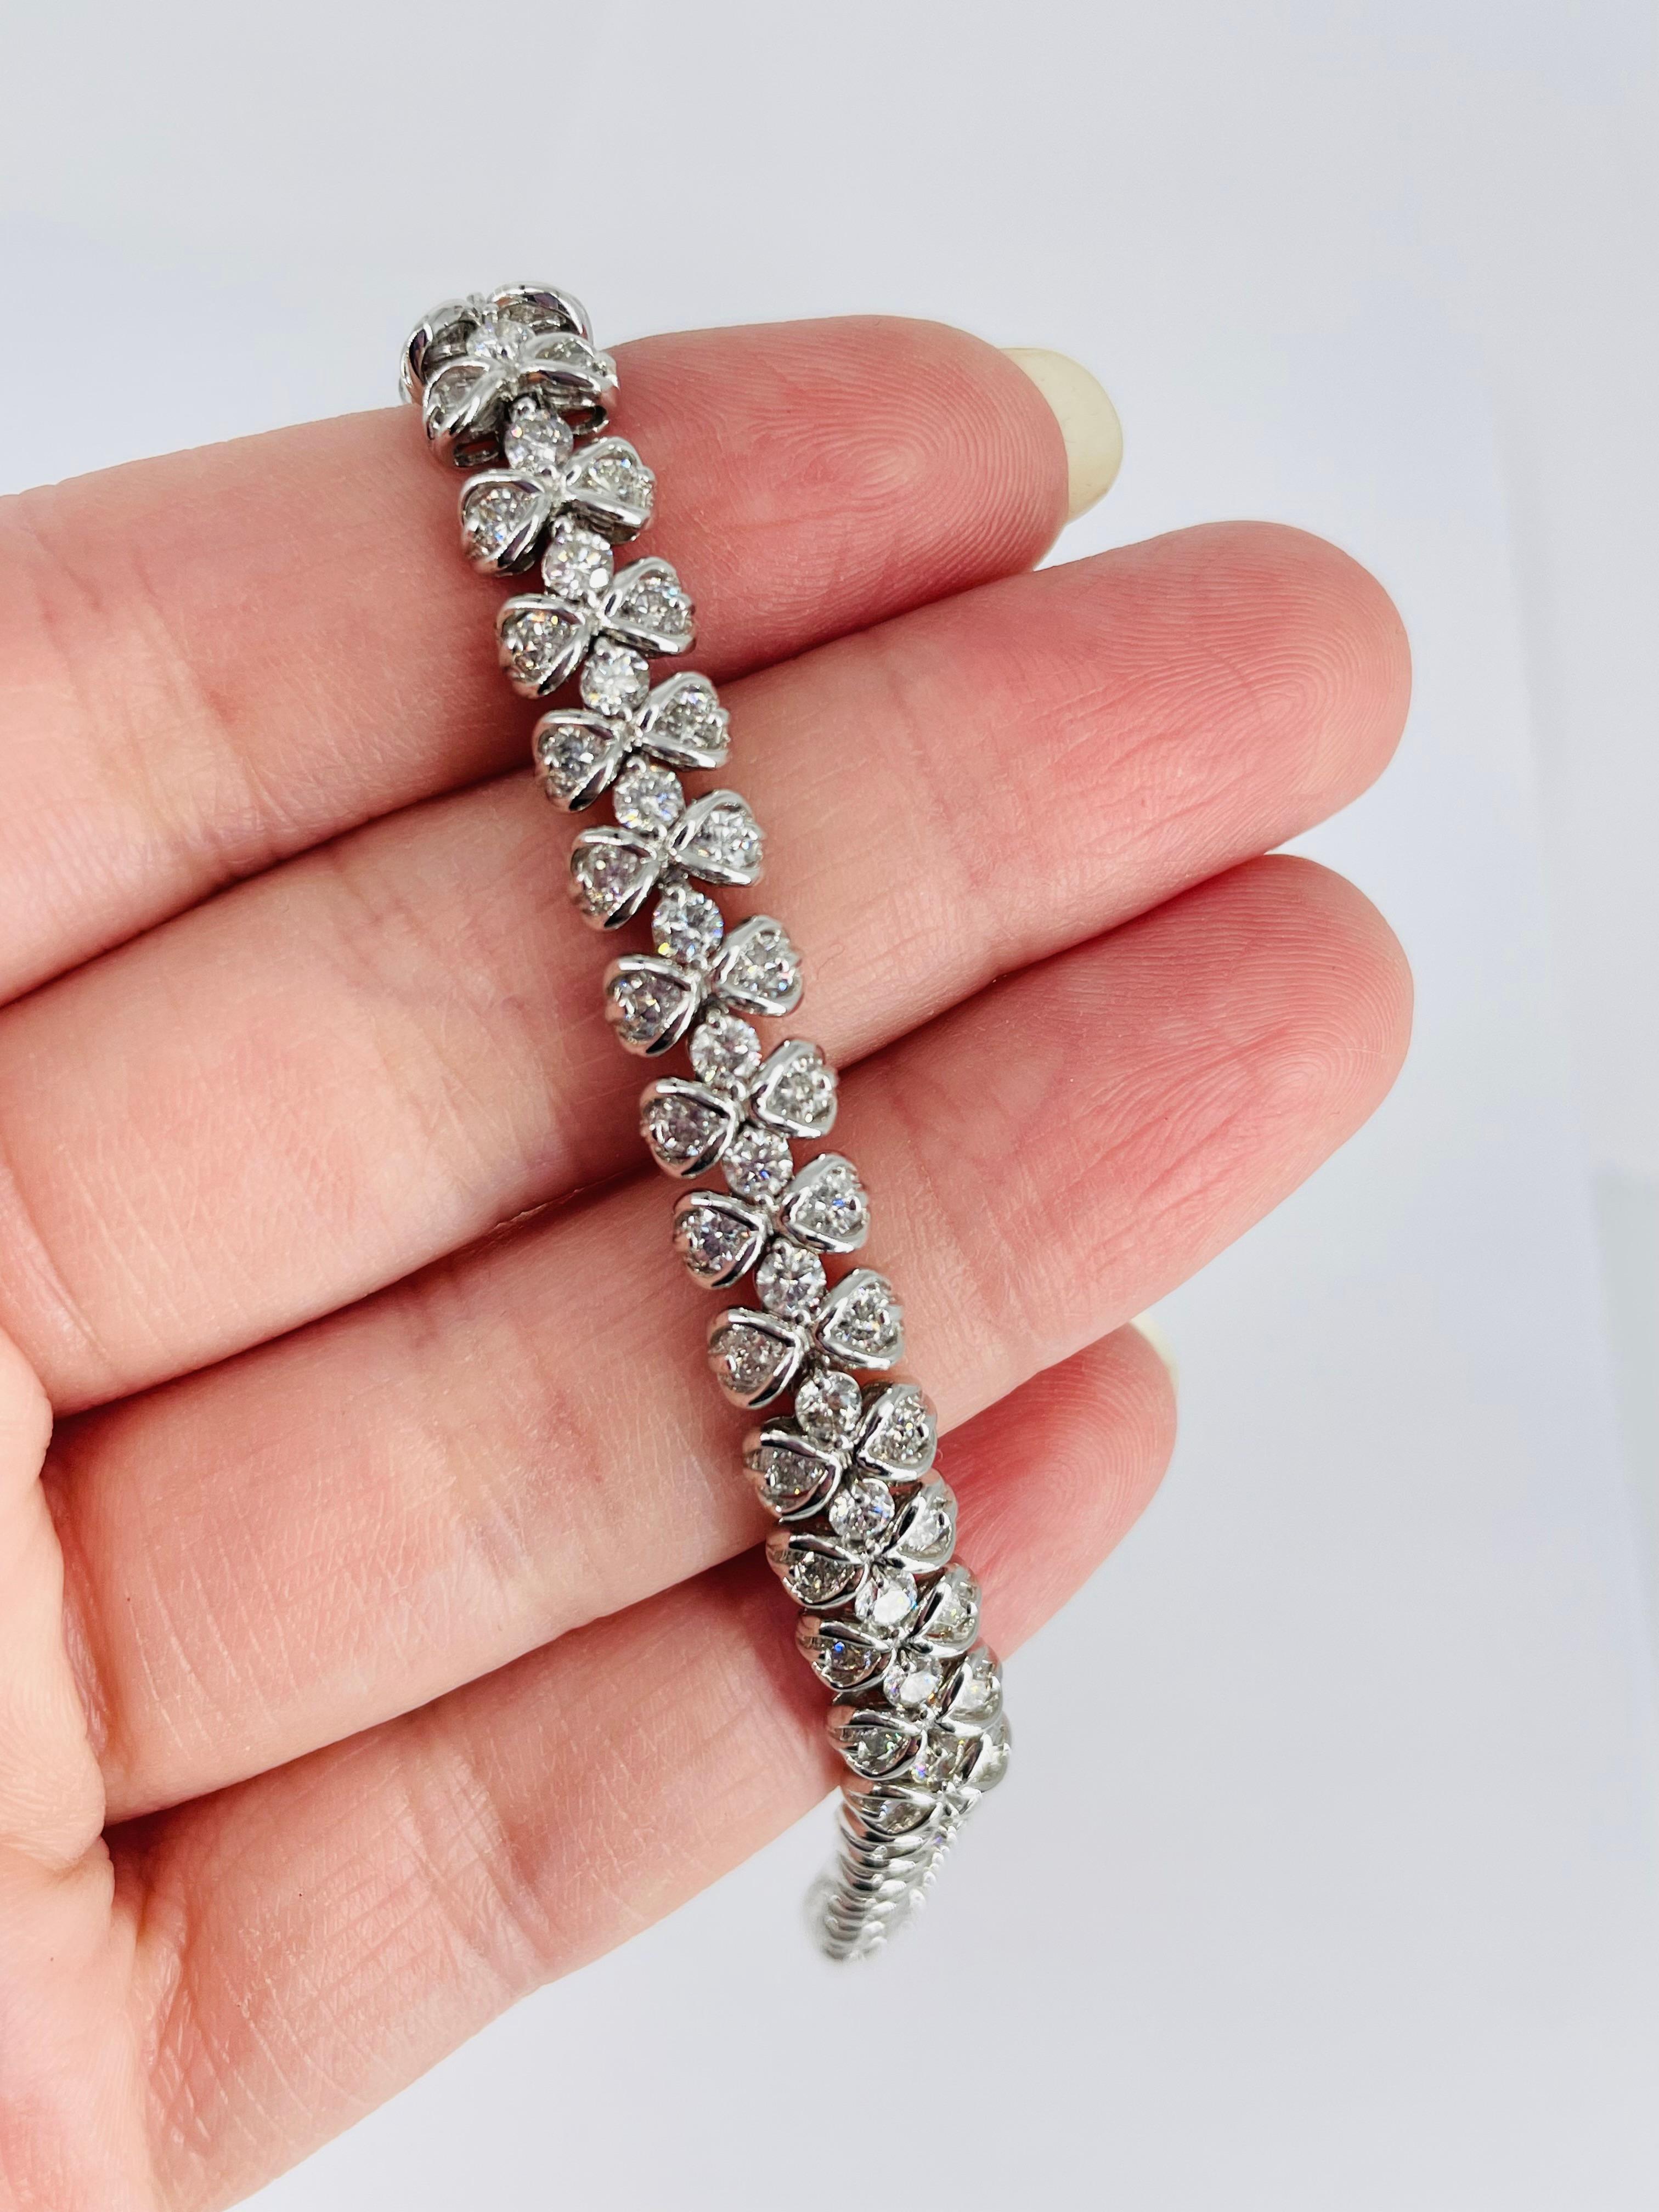 This sparkling diamond bracelet is a unique take on the classic tennis bracelet. Three rows of round diamonds create a soft scalloped shape.  The two outside rows of diamonds are set in a delicate half bezel which adds definition to the stones. The